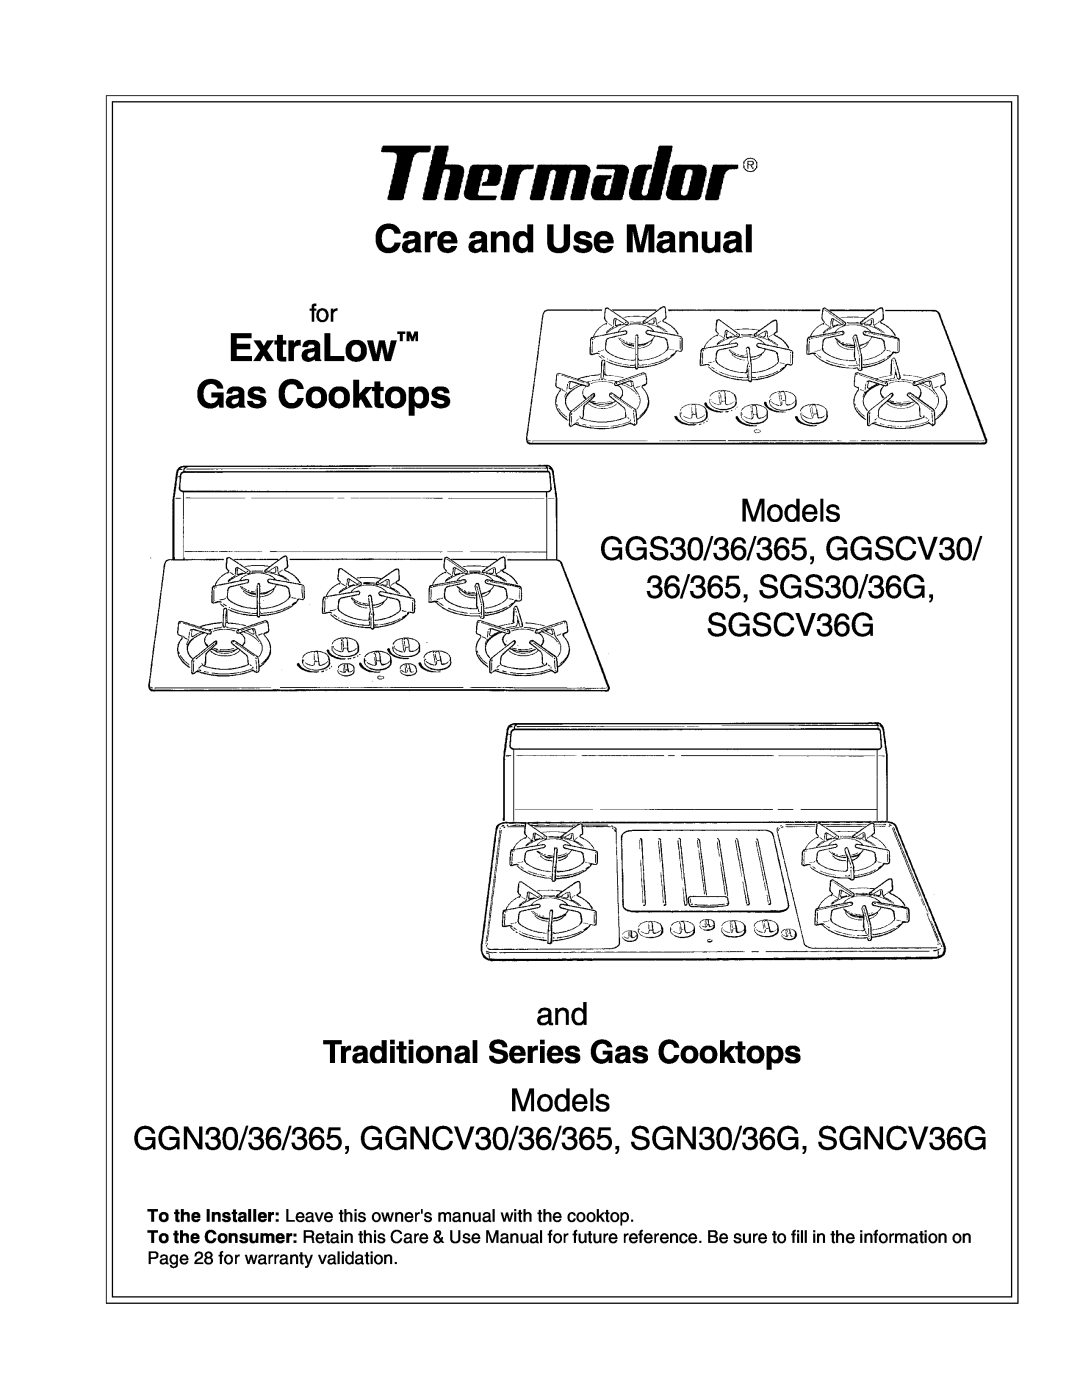 Thermador instruction manual MODELS GGS30, GGS36, GGS365, GGN30, GGN36, GGN365, SGS30, SGS36G, SGN30, SGN36G 